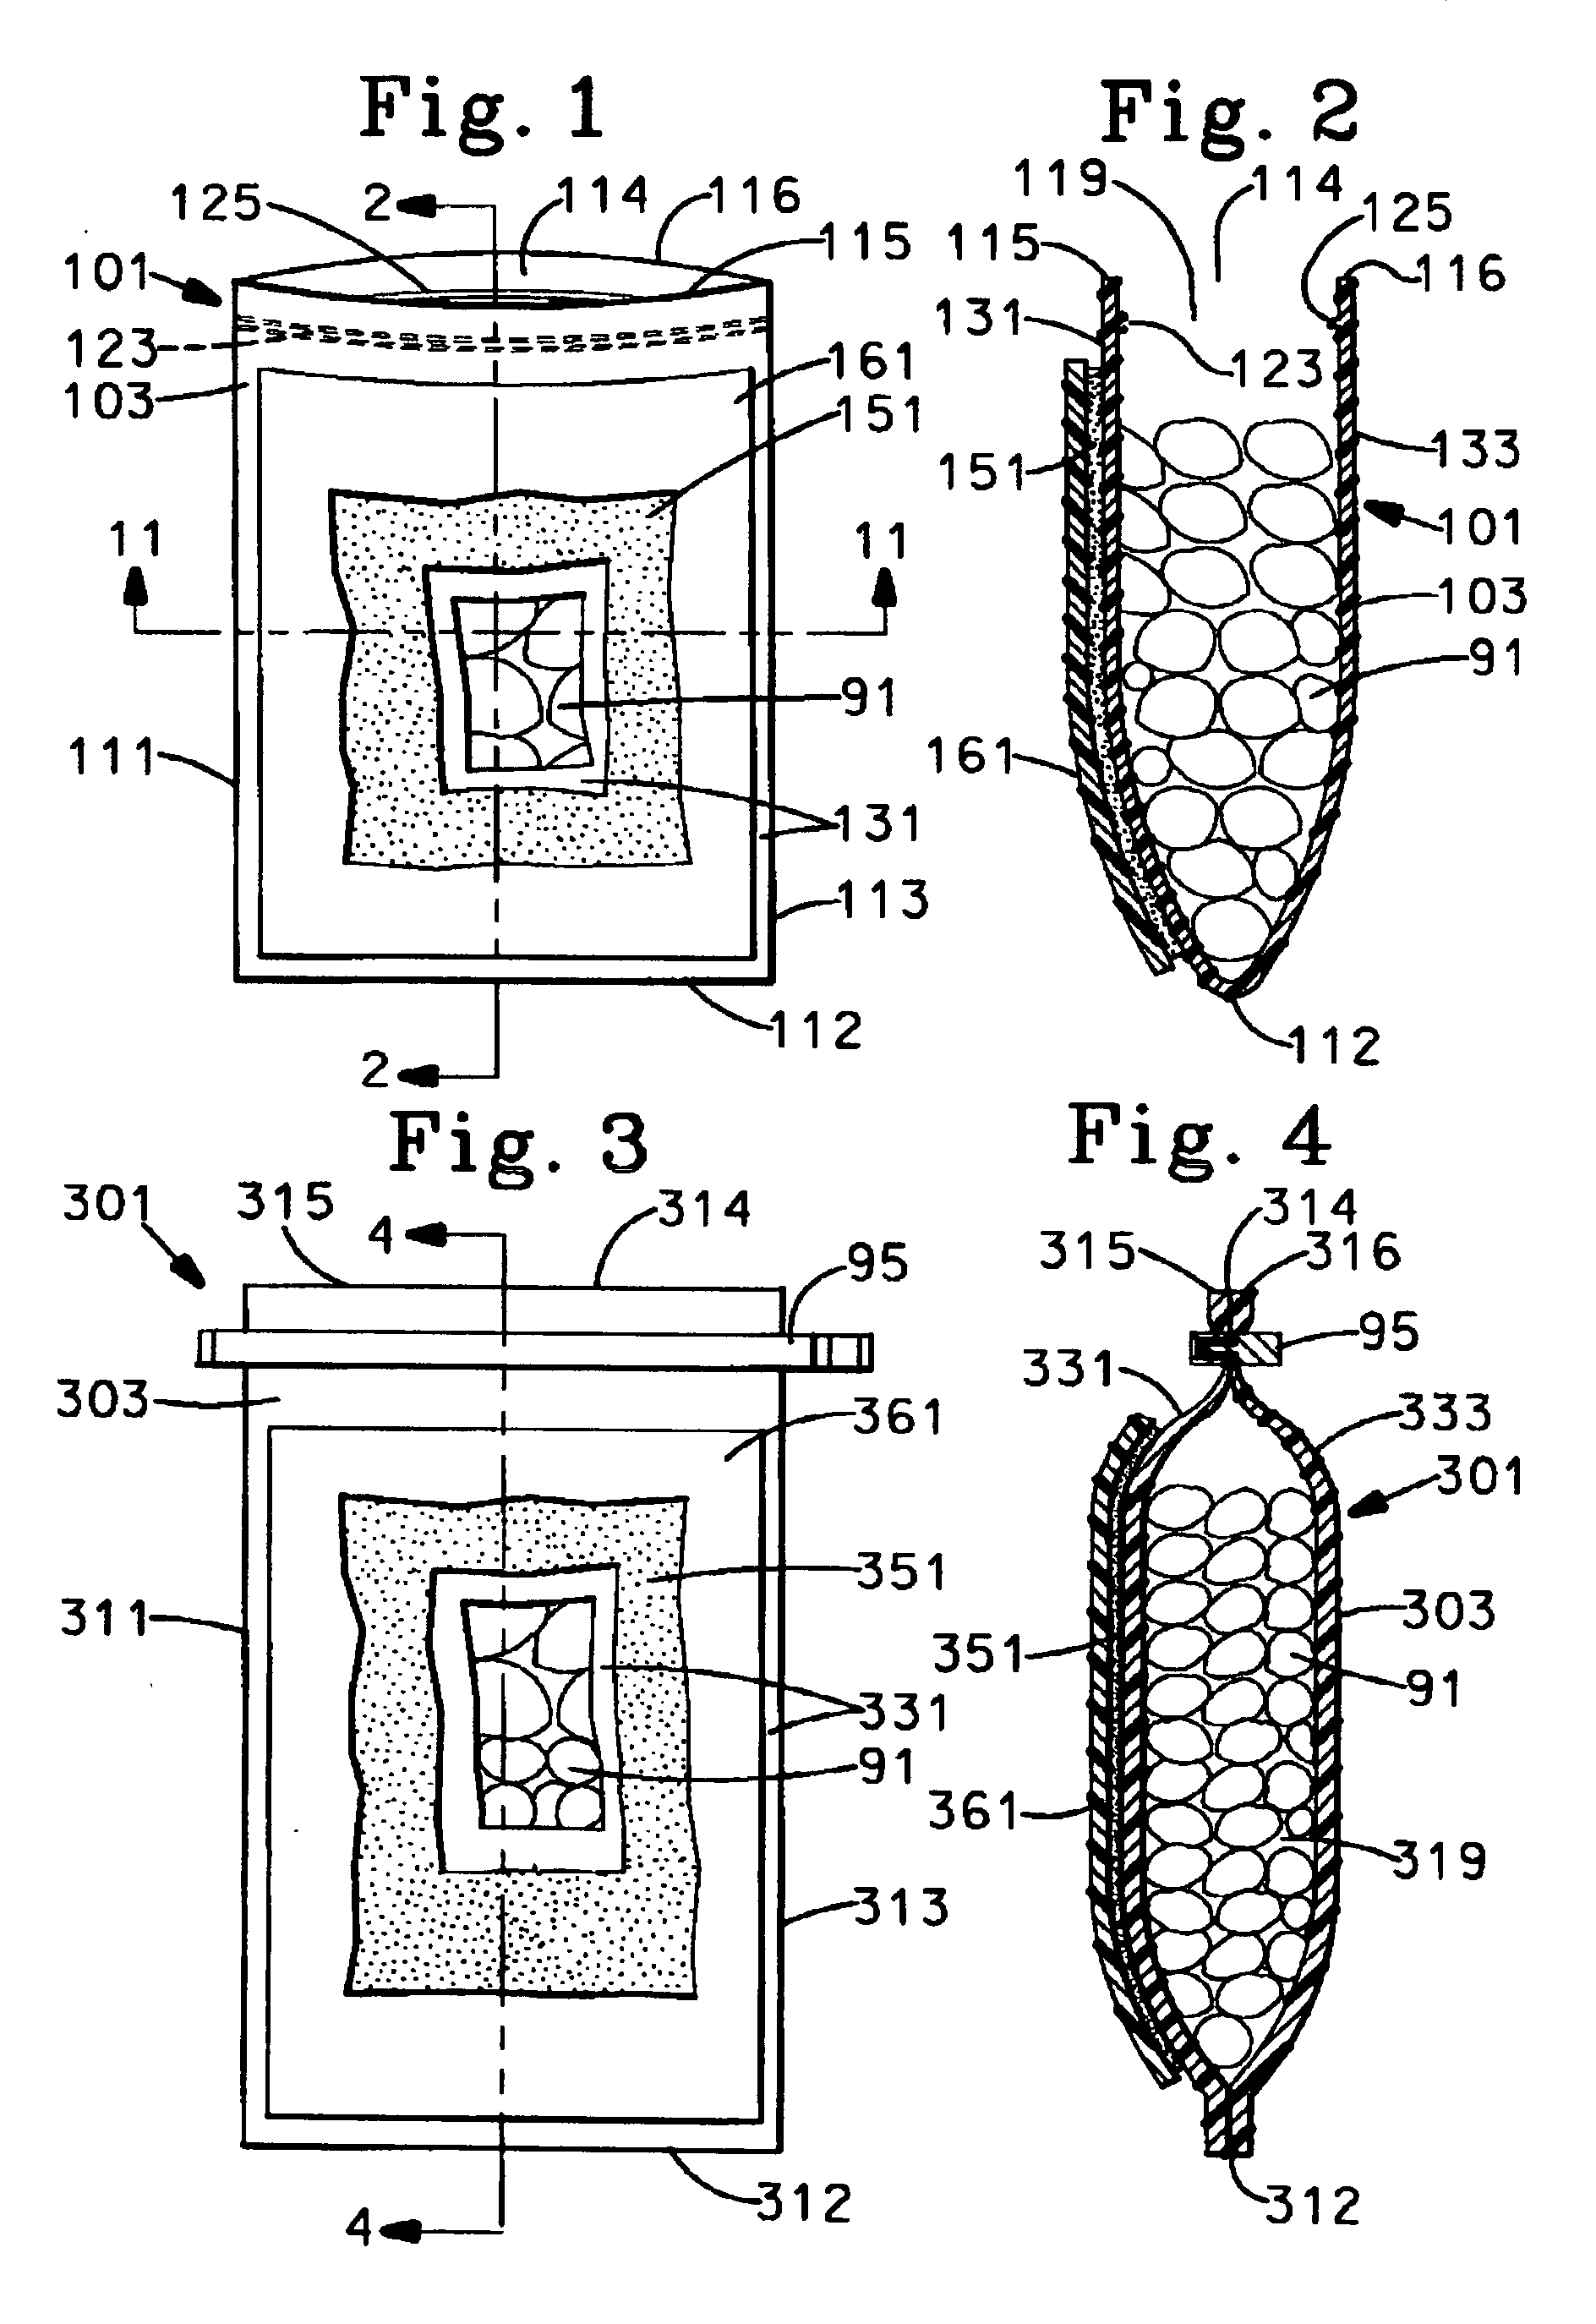 Non-slip ice bag device and method for using same to treat patients